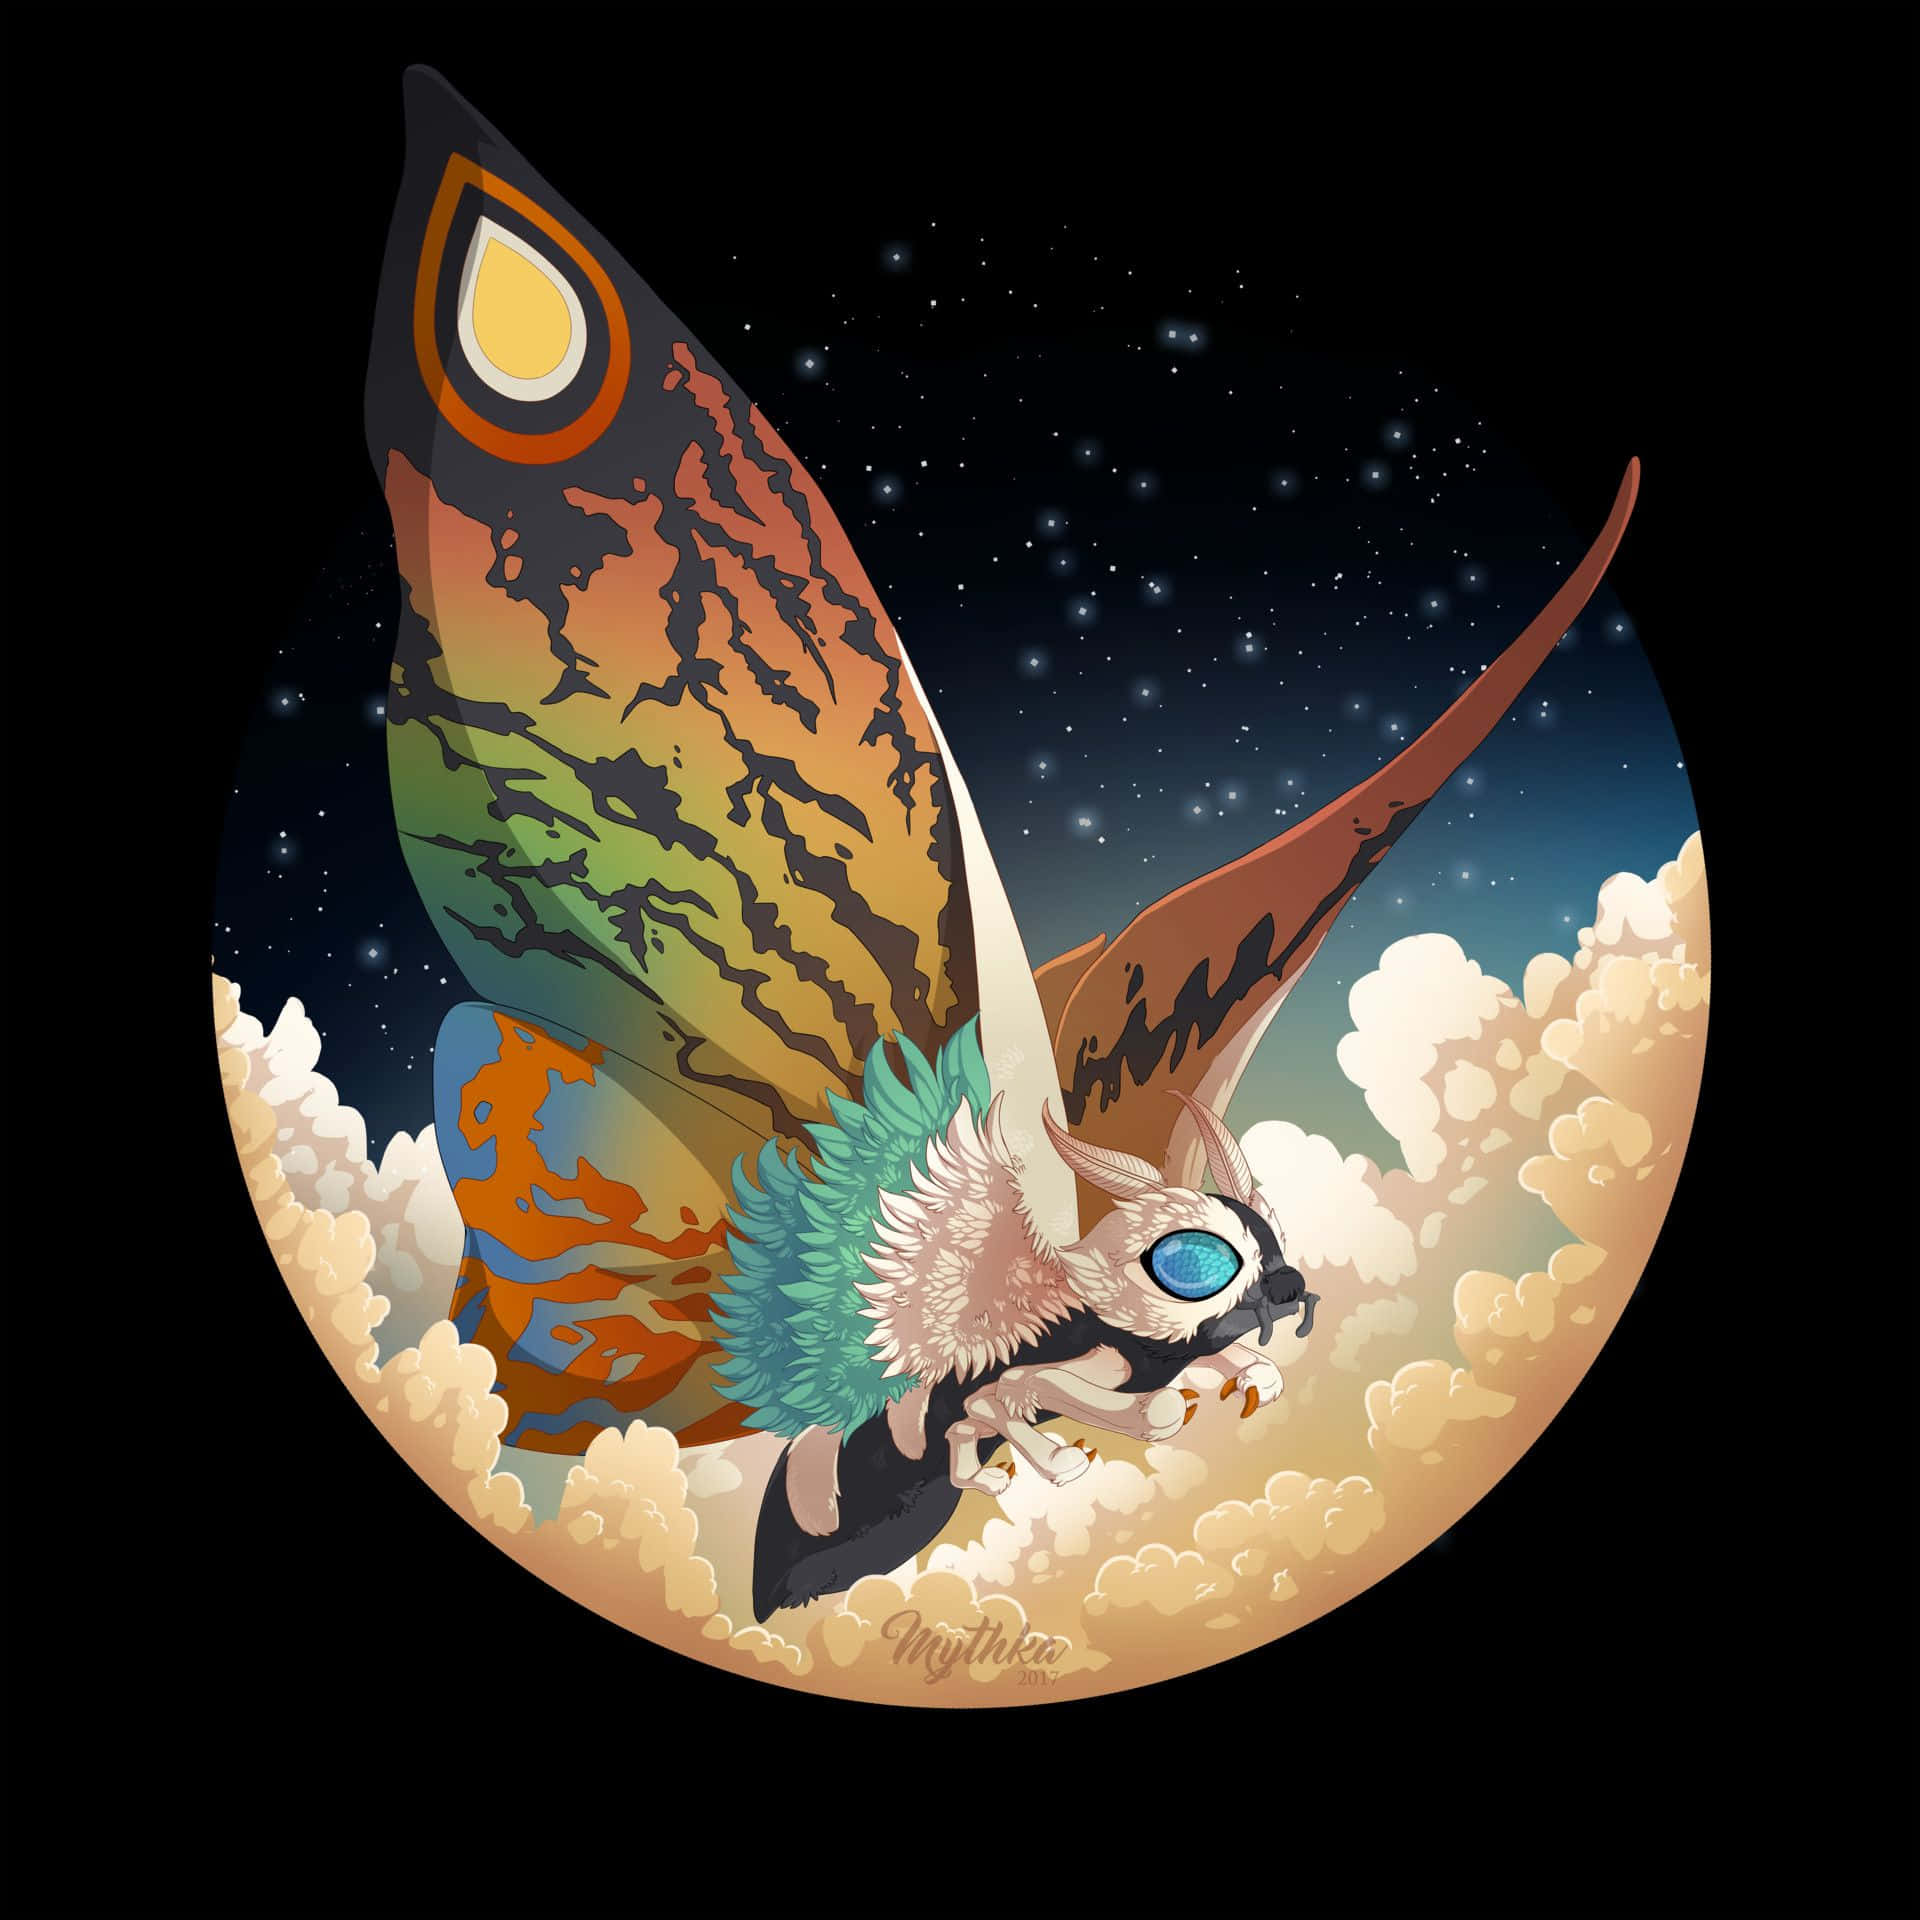 Mothra, the queen of monsters, soaring through the skies Wallpaper